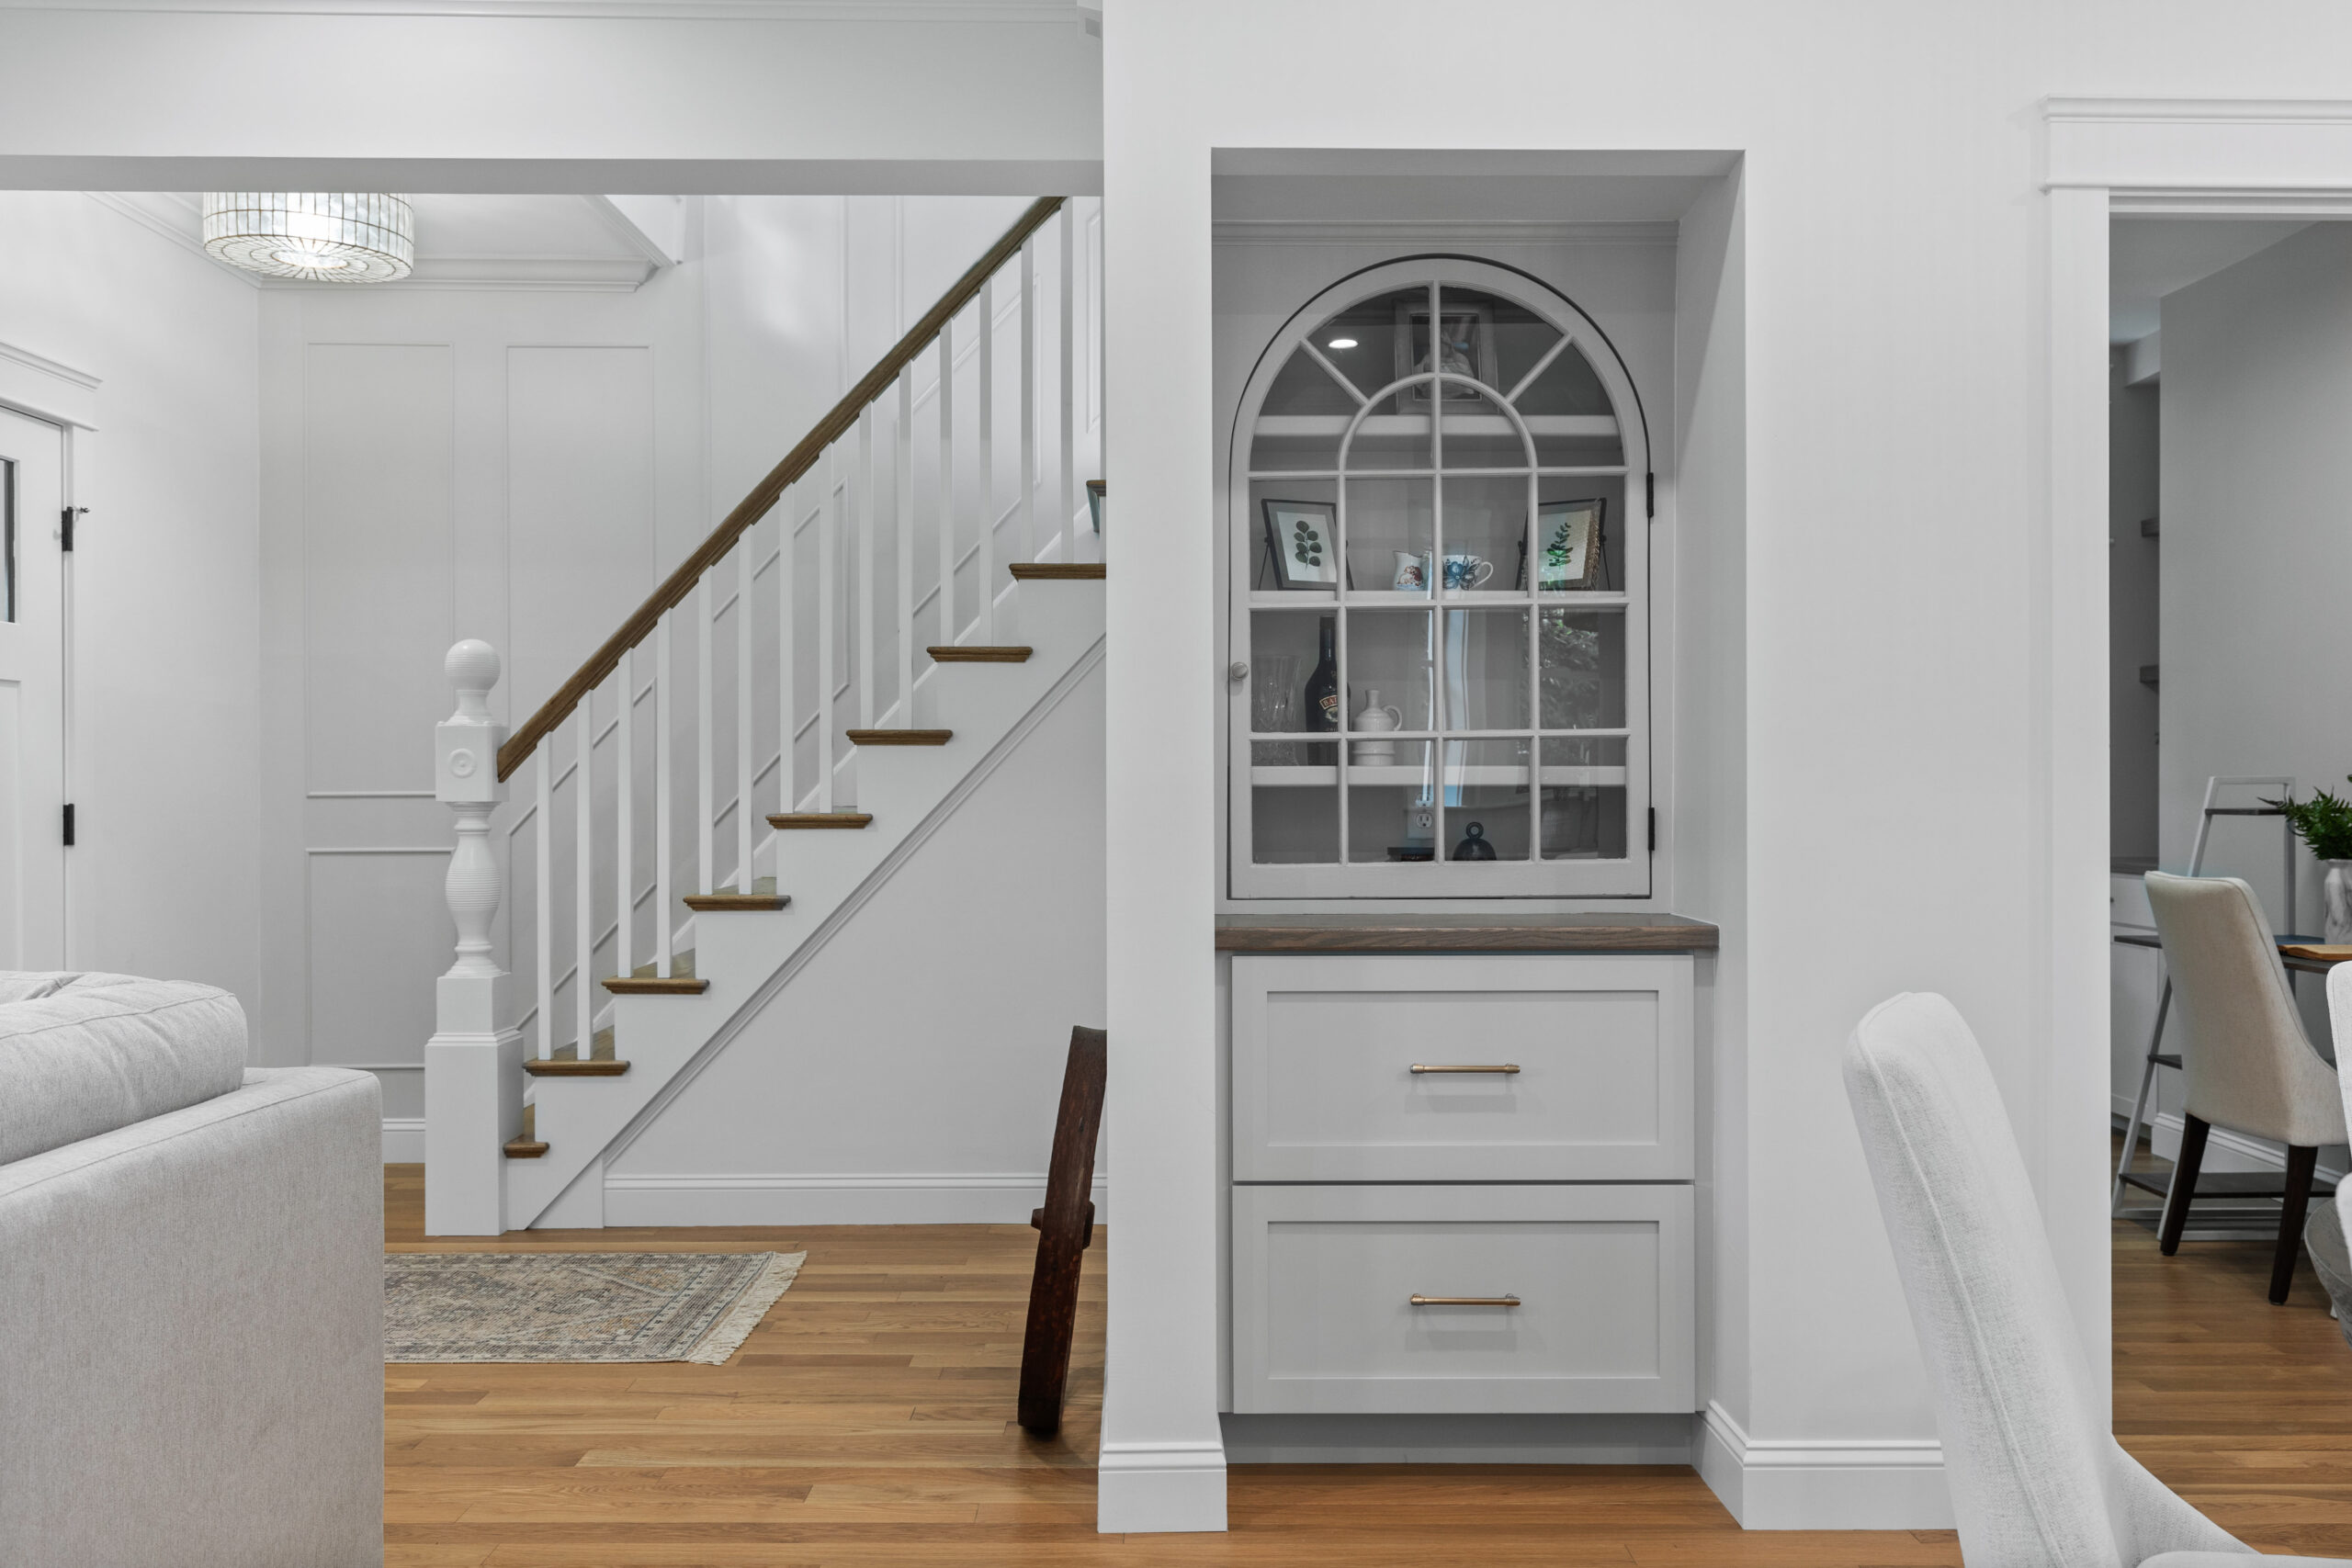 Image of an elegantly renovated space in a vintage New England home, featuring a built-in display cabinet with glass doors and wooden shelves. The entryway showcases updated hardwood flooring, white walls, and modern fixtures, including a chic light fixture and a decorative rug. The adjacent office area is visible through a pair of French doors, completing the sophisticated and functional design.